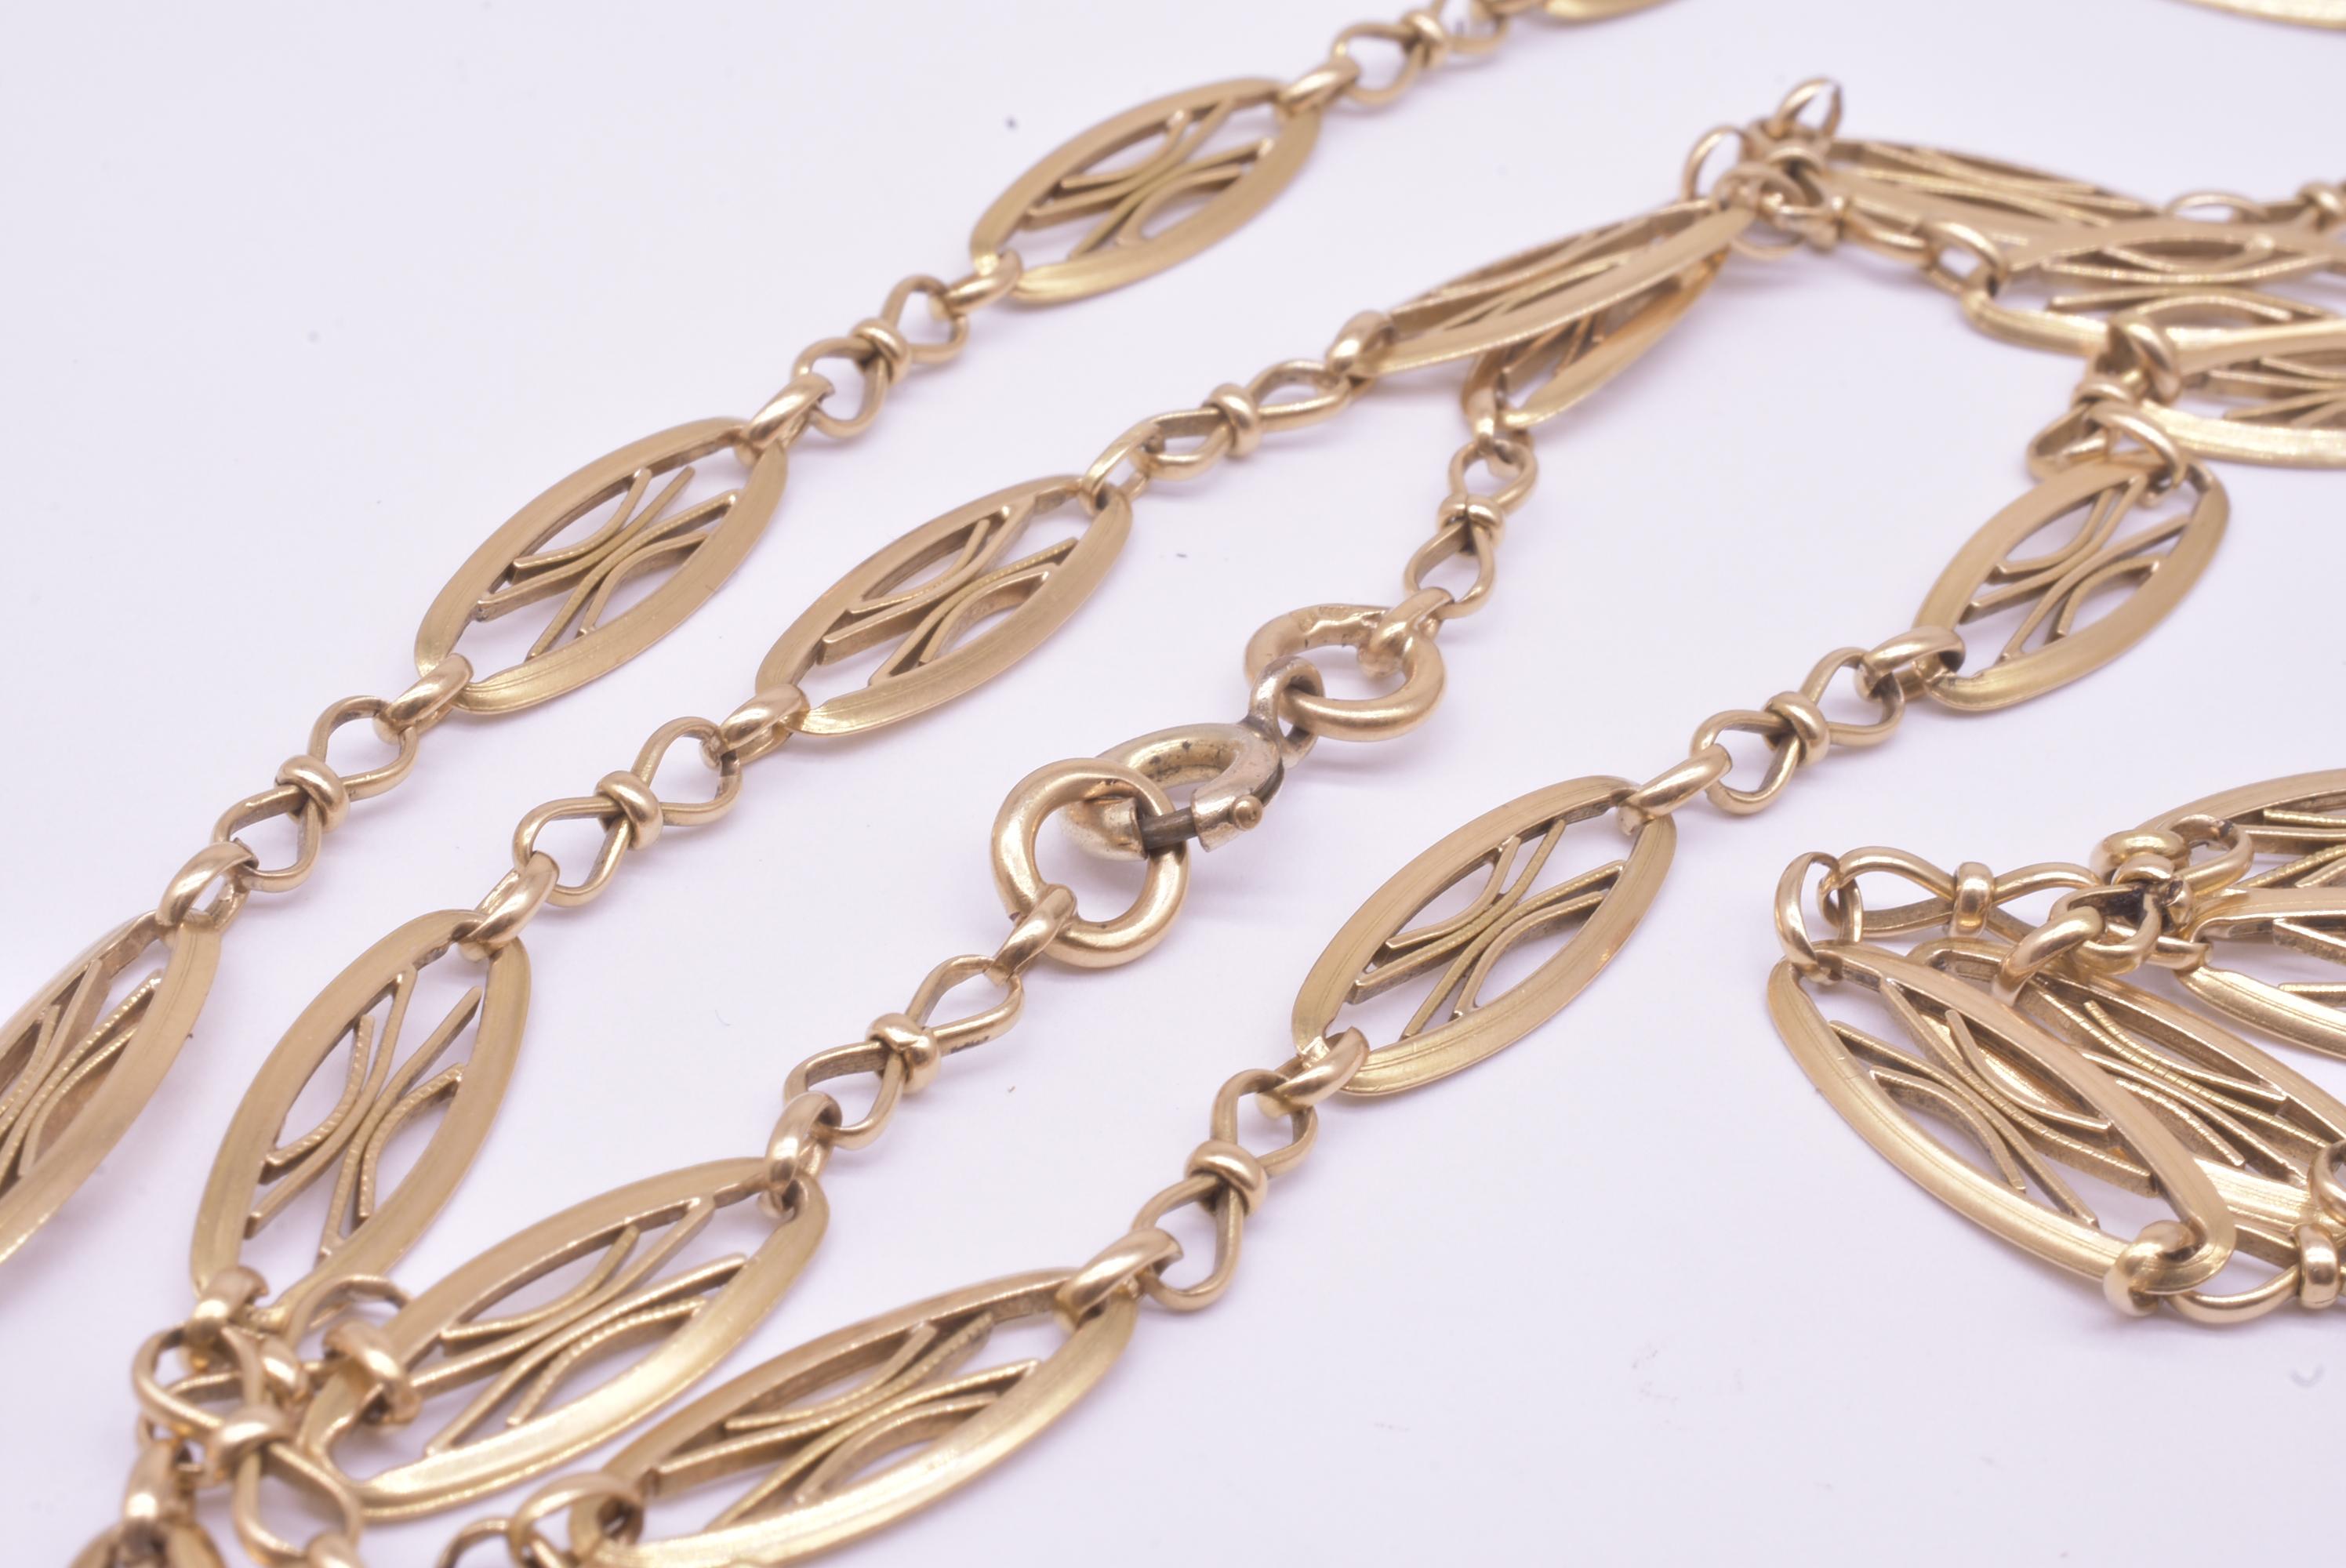 Antique 18 Karat gold French Filigree Watch Chain Necklace For Sale 1